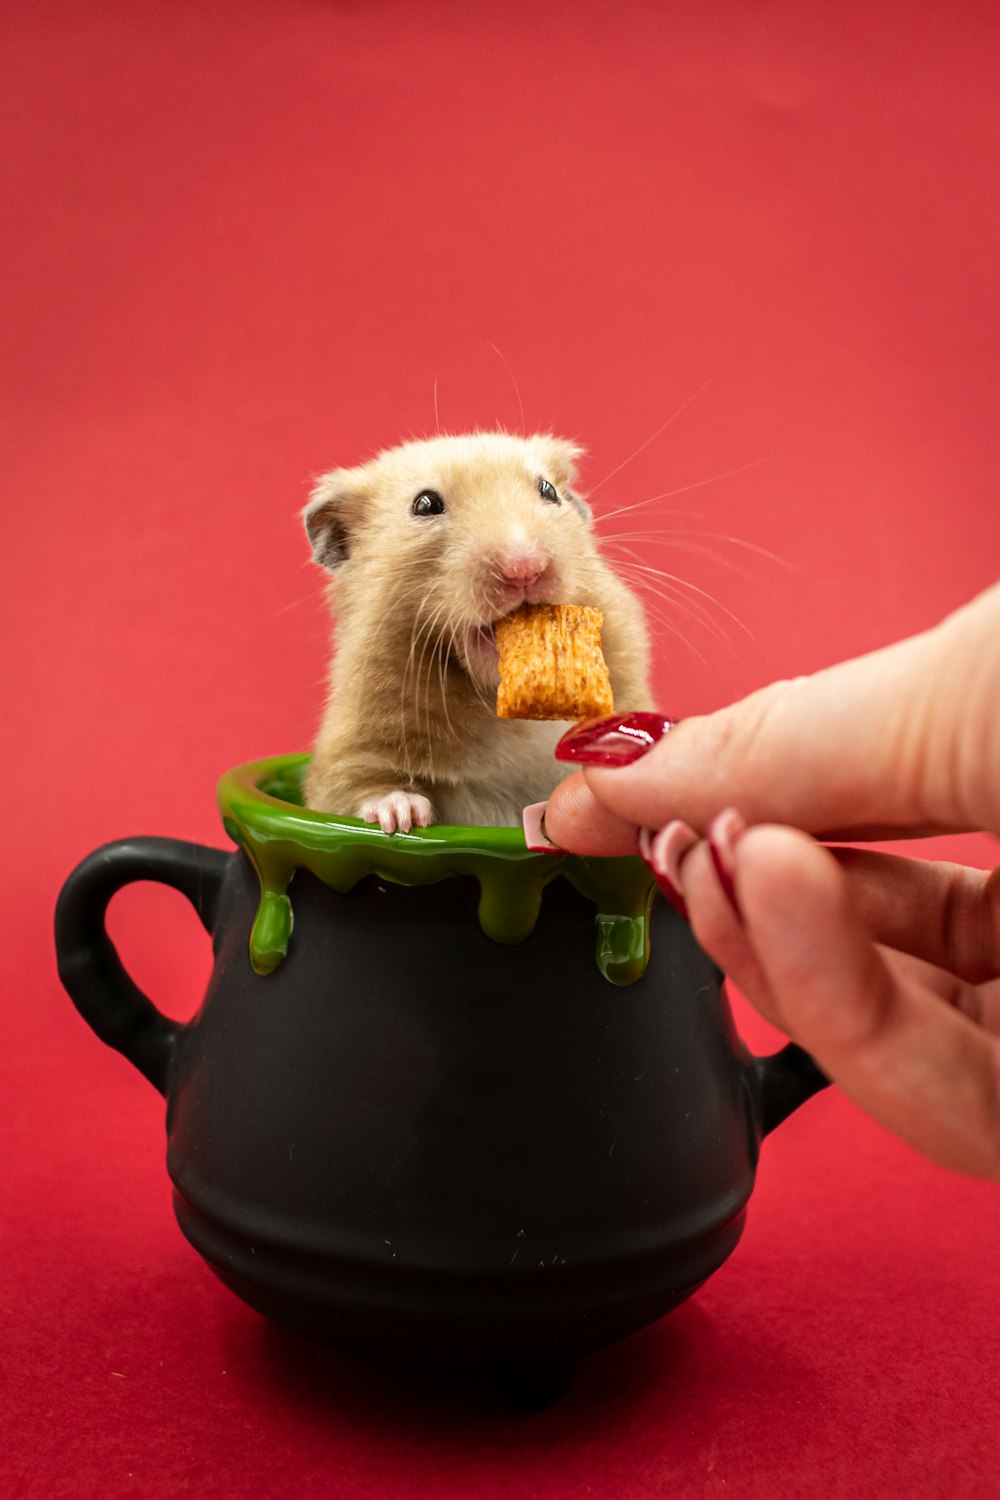 a hamster eating a piece of food in a pot